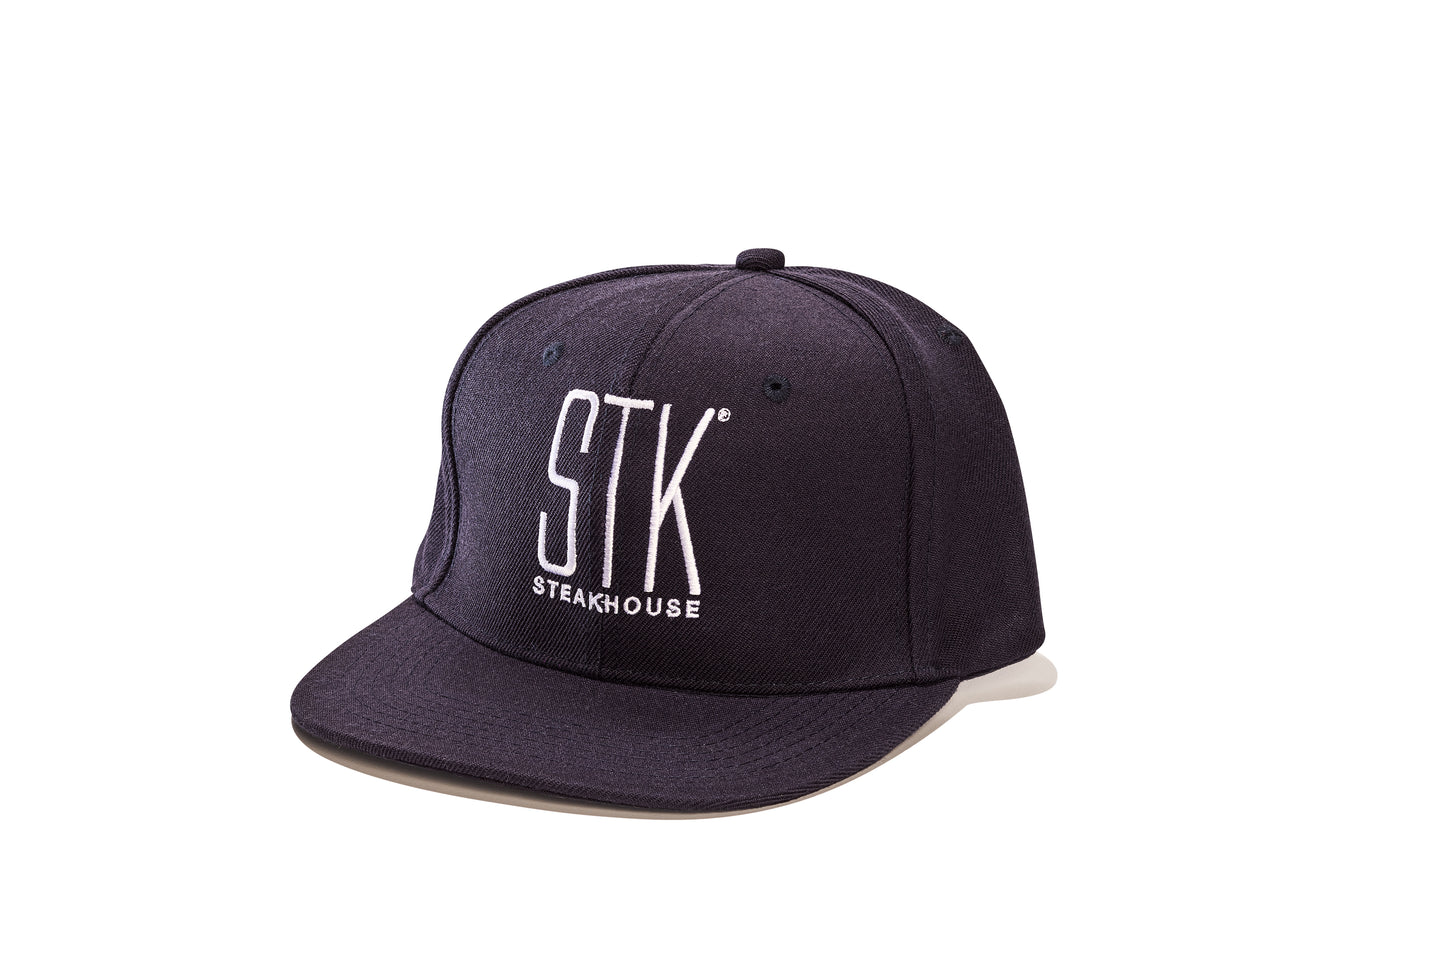 black hat with embroidered STK logo